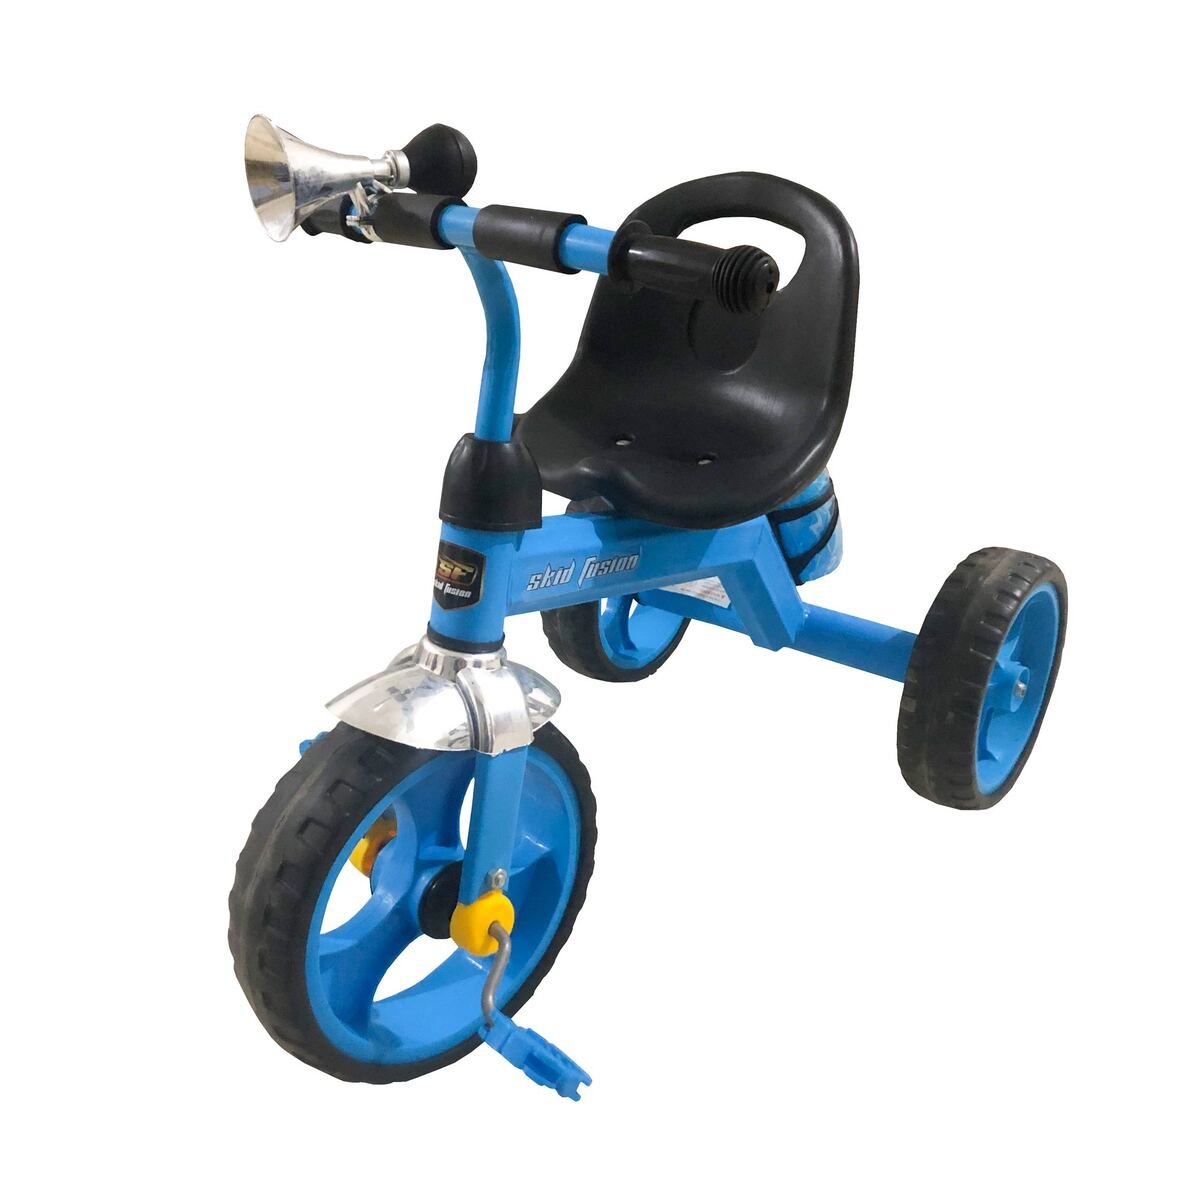 Skid Fusion Childrens Tricycle Blue